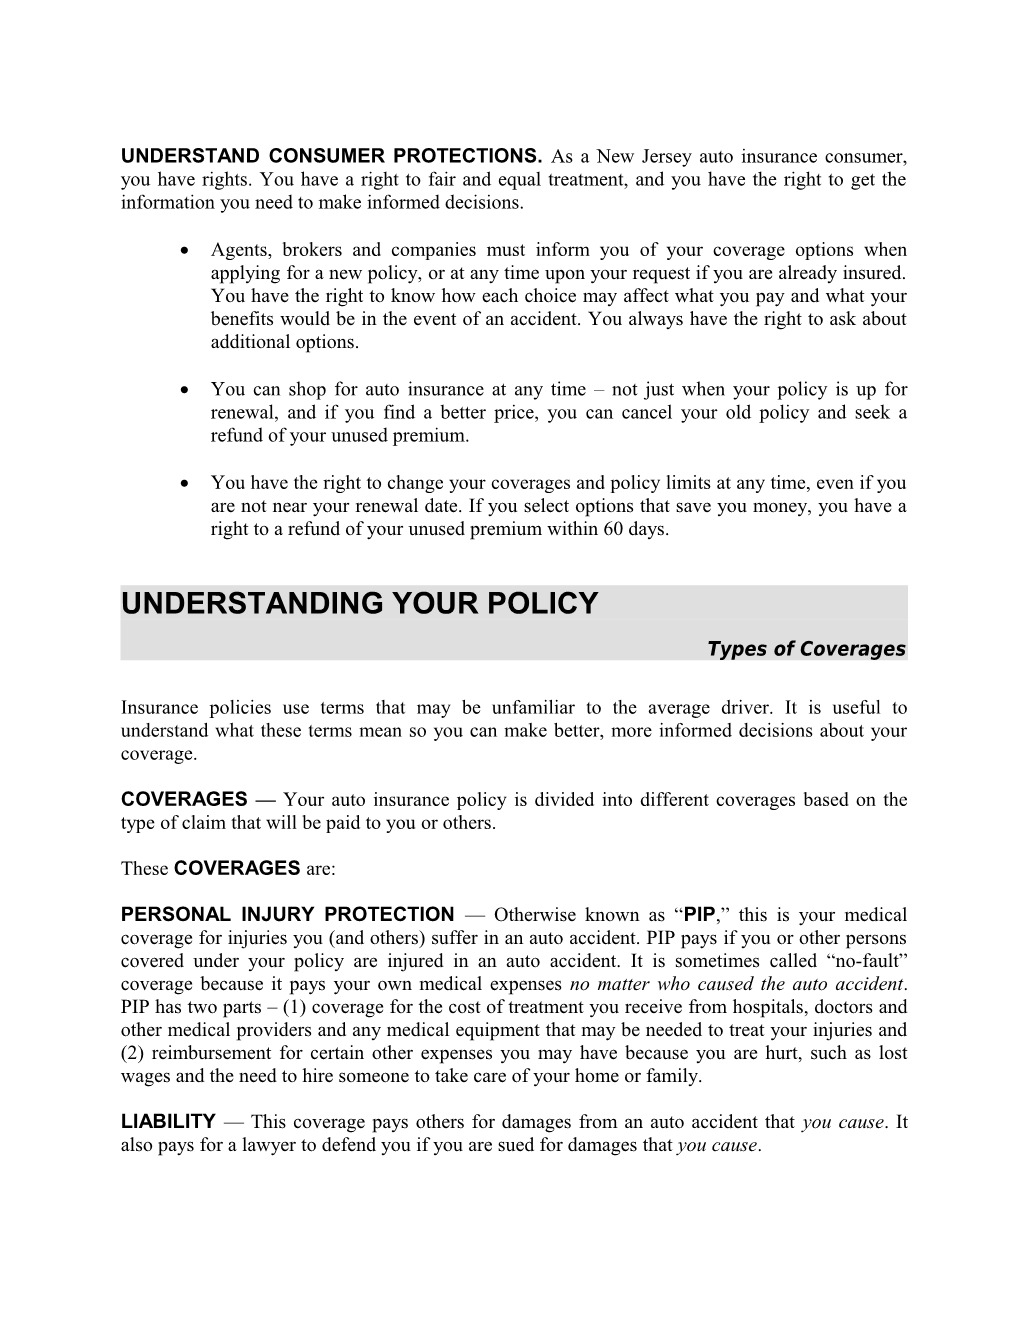 Understanding Your Policy Page